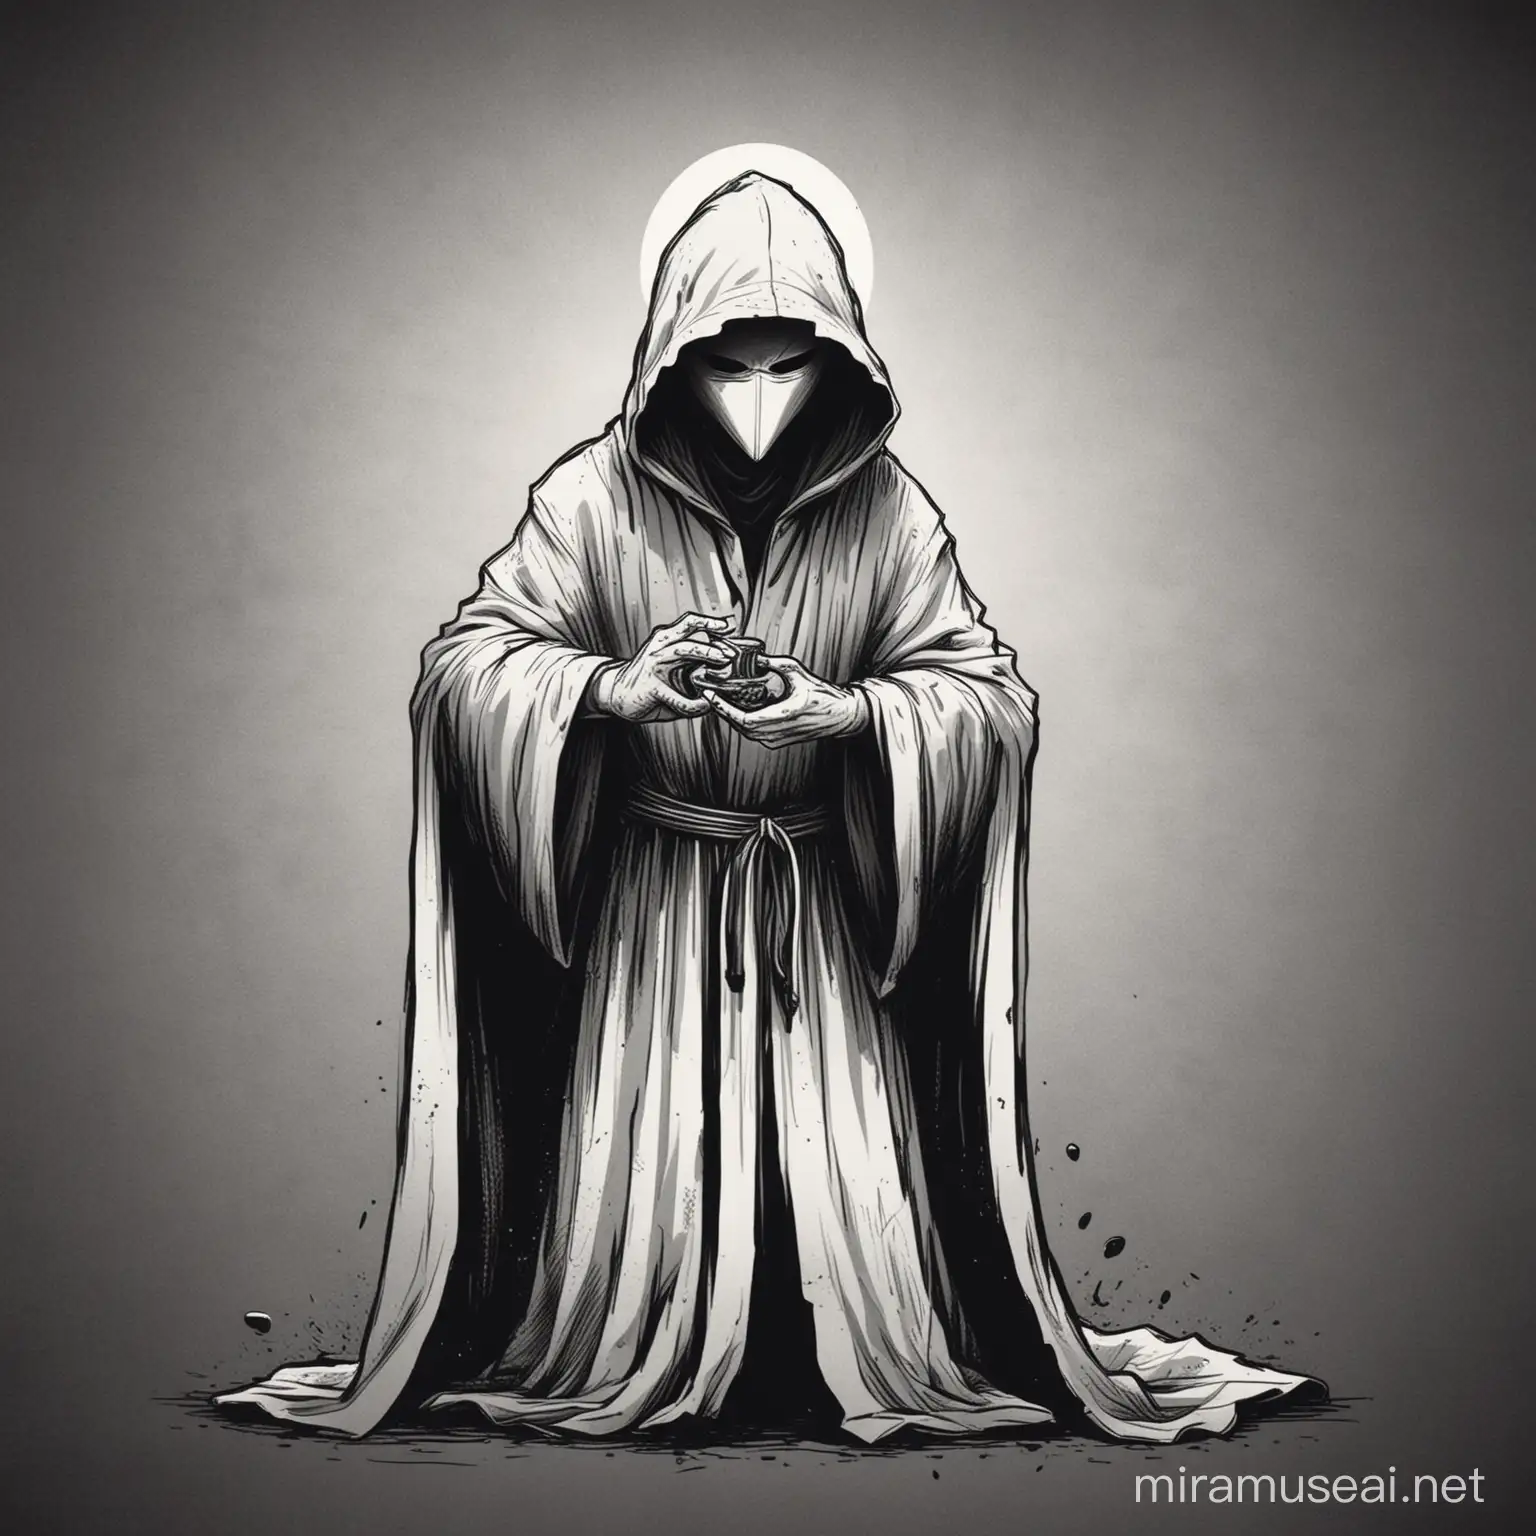 Create a black and white cartoon drawing depicting a hooded cultist performing a mysterious ritual. Emphasize simplicity with clean lines and minimal shading, capturing the essence of a Calvin and Hobbes black and white comic strip. The cultist should be in a hooded robe. The background should be white to maintain a crisp comic strip aesthetic.